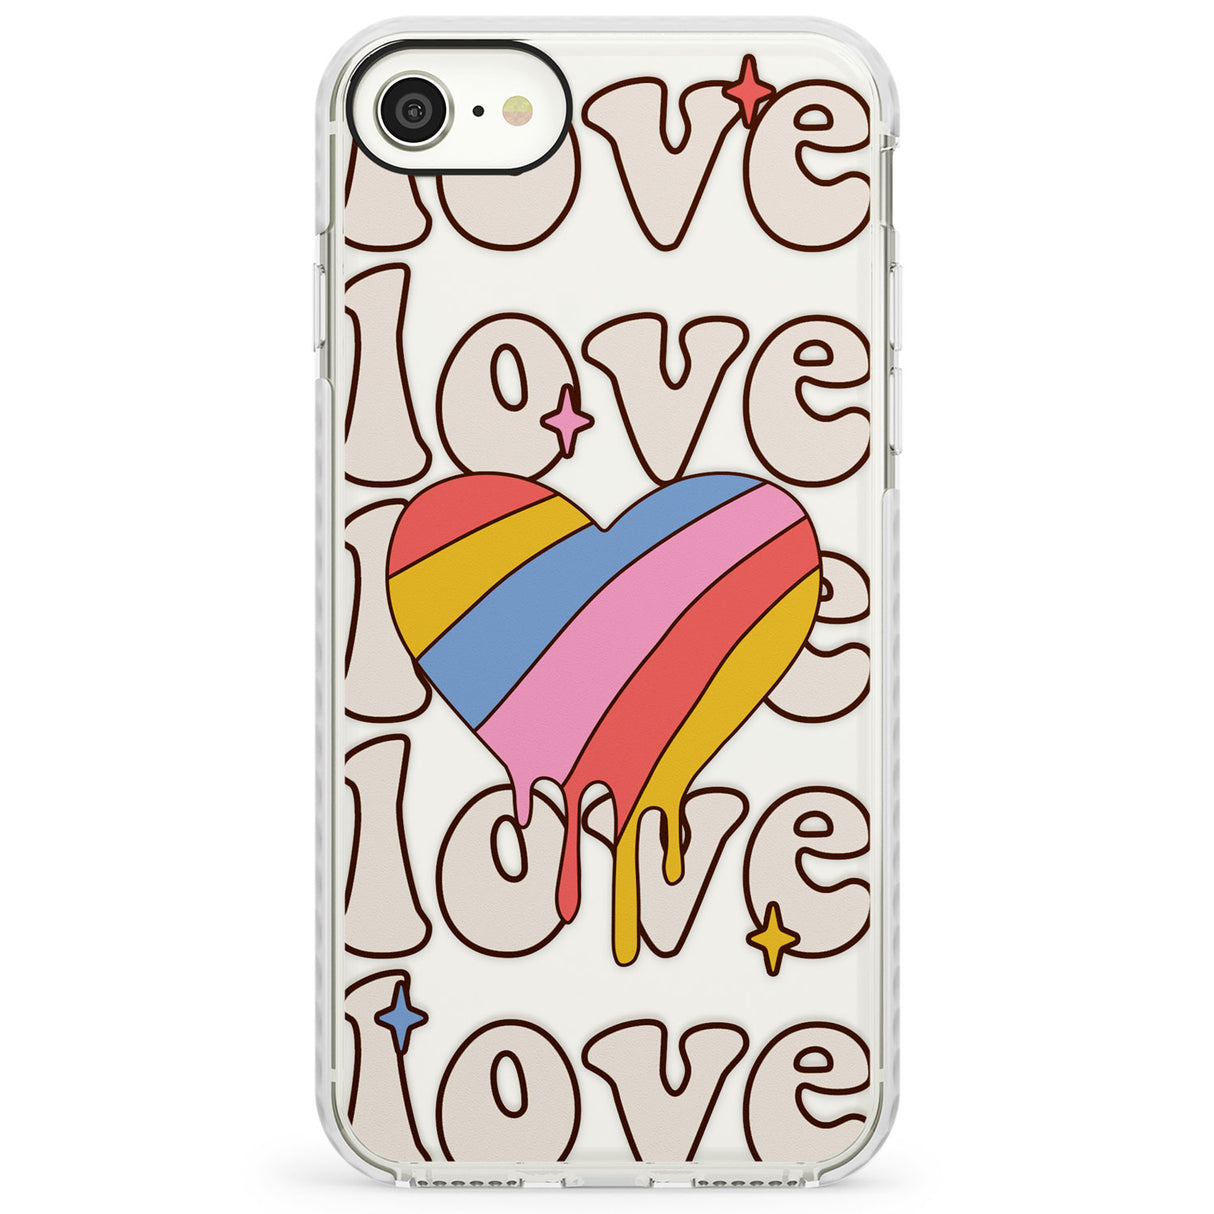 Groovy LoveImpact Phone Case for iPhone SE